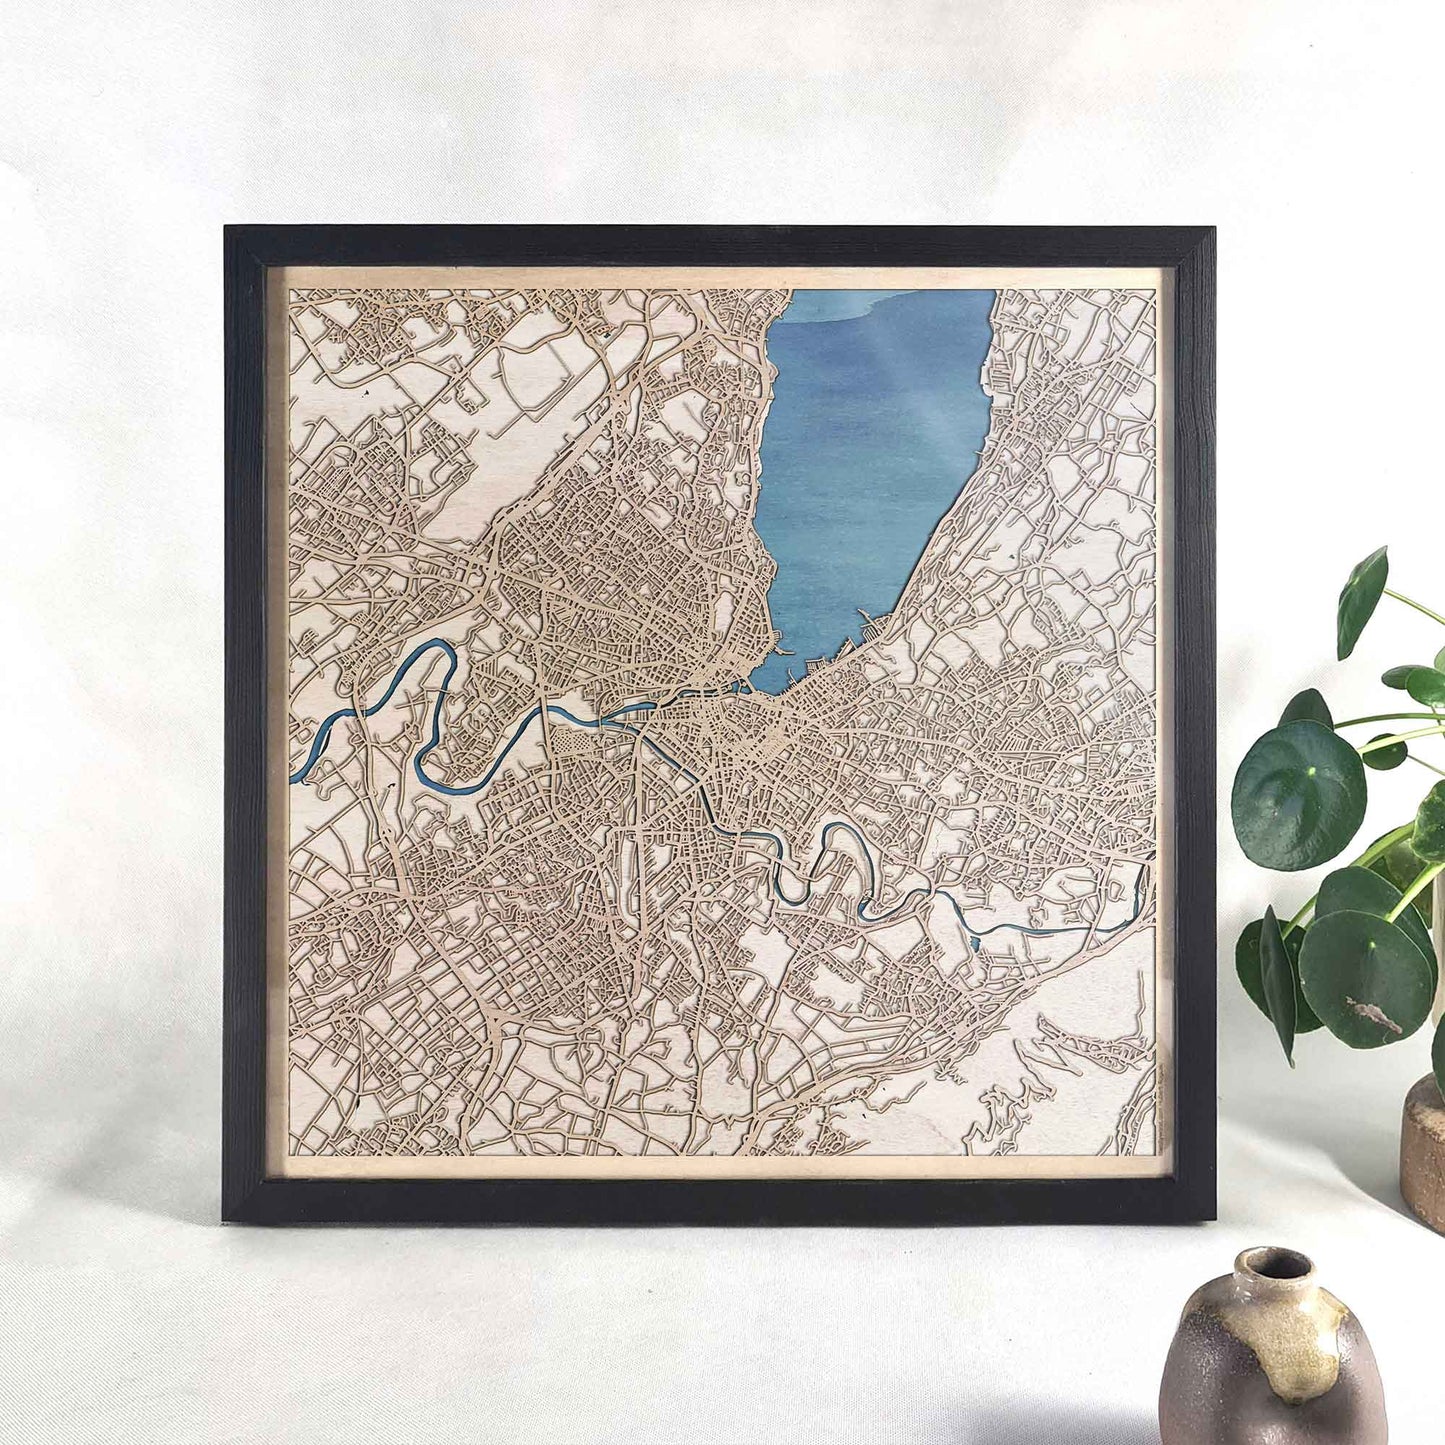 Geneva Wooden Map by CityWood - Custom Wood Map Art - Unique Laser Cut Engraved - Anniversary Gift